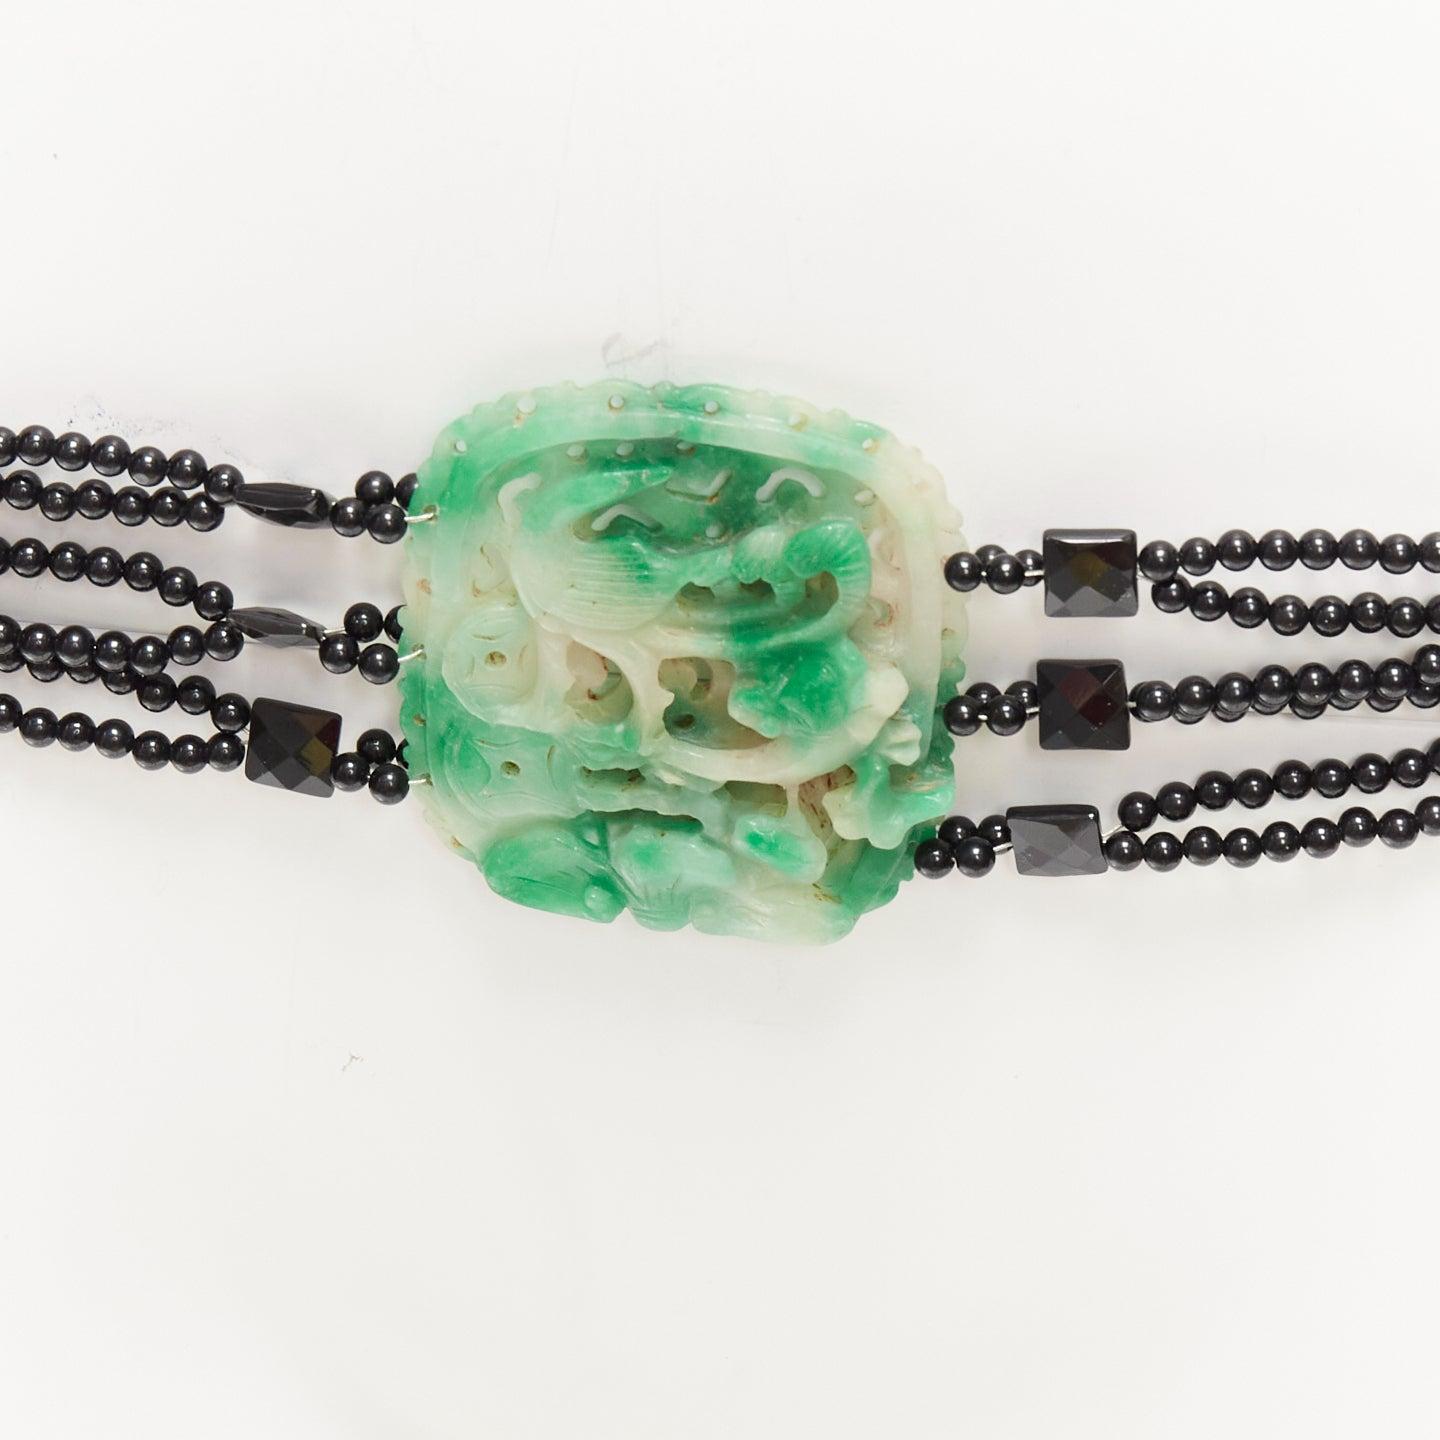 JENNIFER POLLOCK green oriental chinese stamp jade black beads chain belt
Reference: AAWC/A01198
Brand: Jennifer Pollock
Color: Green, Black
Pattern: Ethnic
Closure: Lobster Clasp
Lining: Black
Extra Details: Chinese style stamp